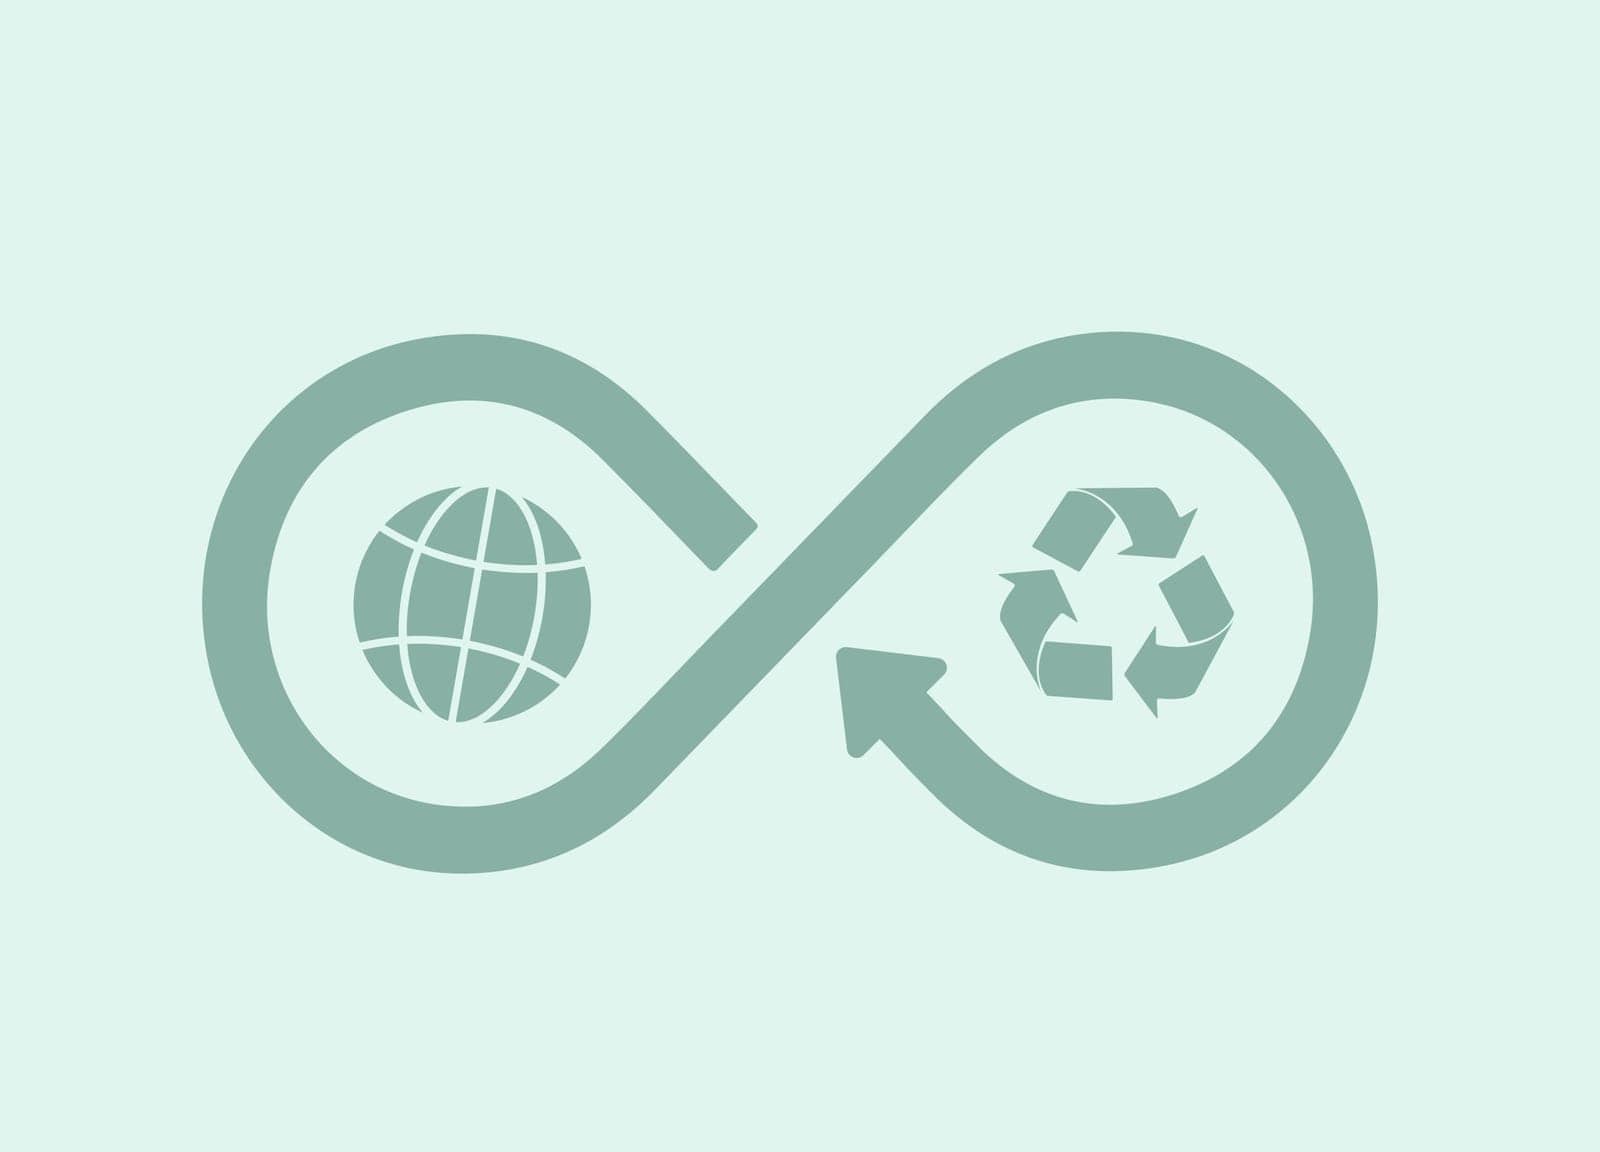 Circular economy - sustainable, eco-friendly solutions. Reusable resources, recycling, and environmental protection. Circular economy cycle with globe and recycle icons. Vector illustration by bestforbest